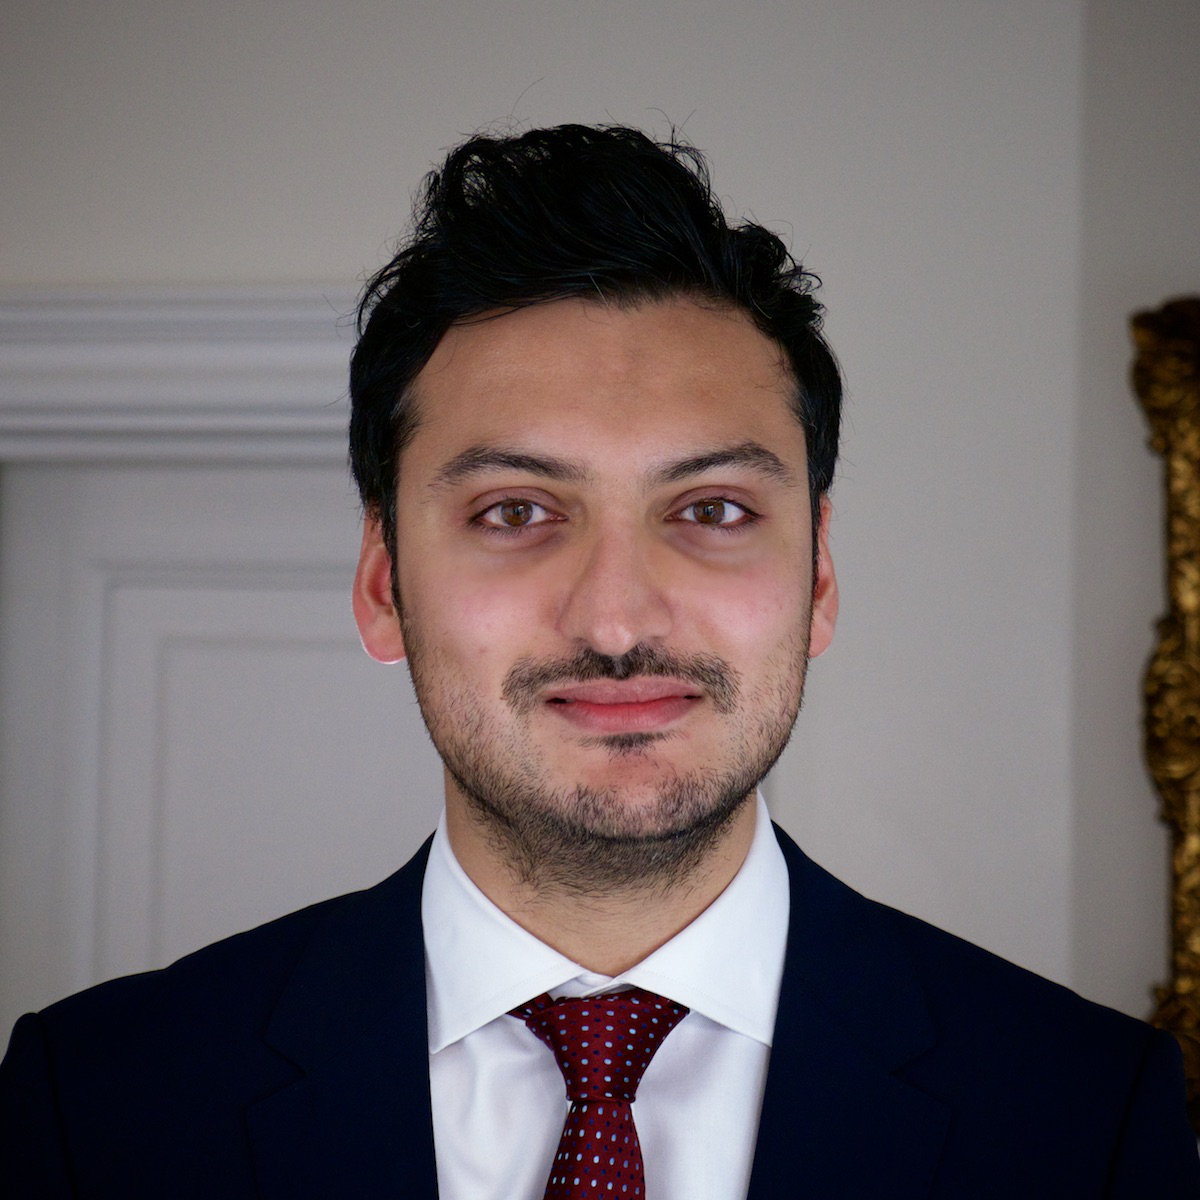 Usman Tariq appointed to UK Covid inquiry legal team